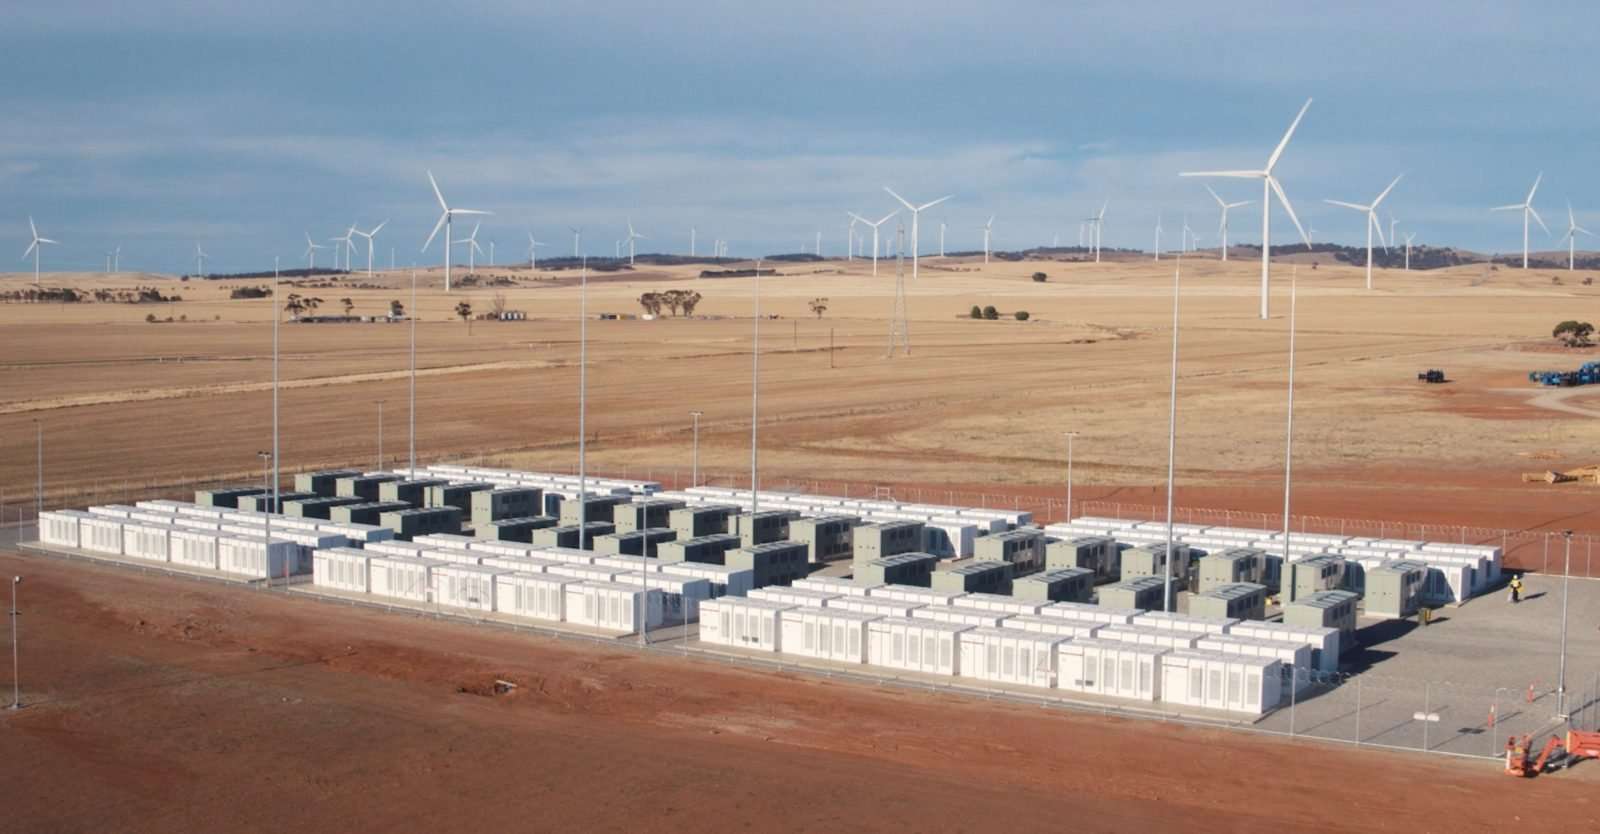 image for Tesla’s giant battery saved $40 million during its first year, report says